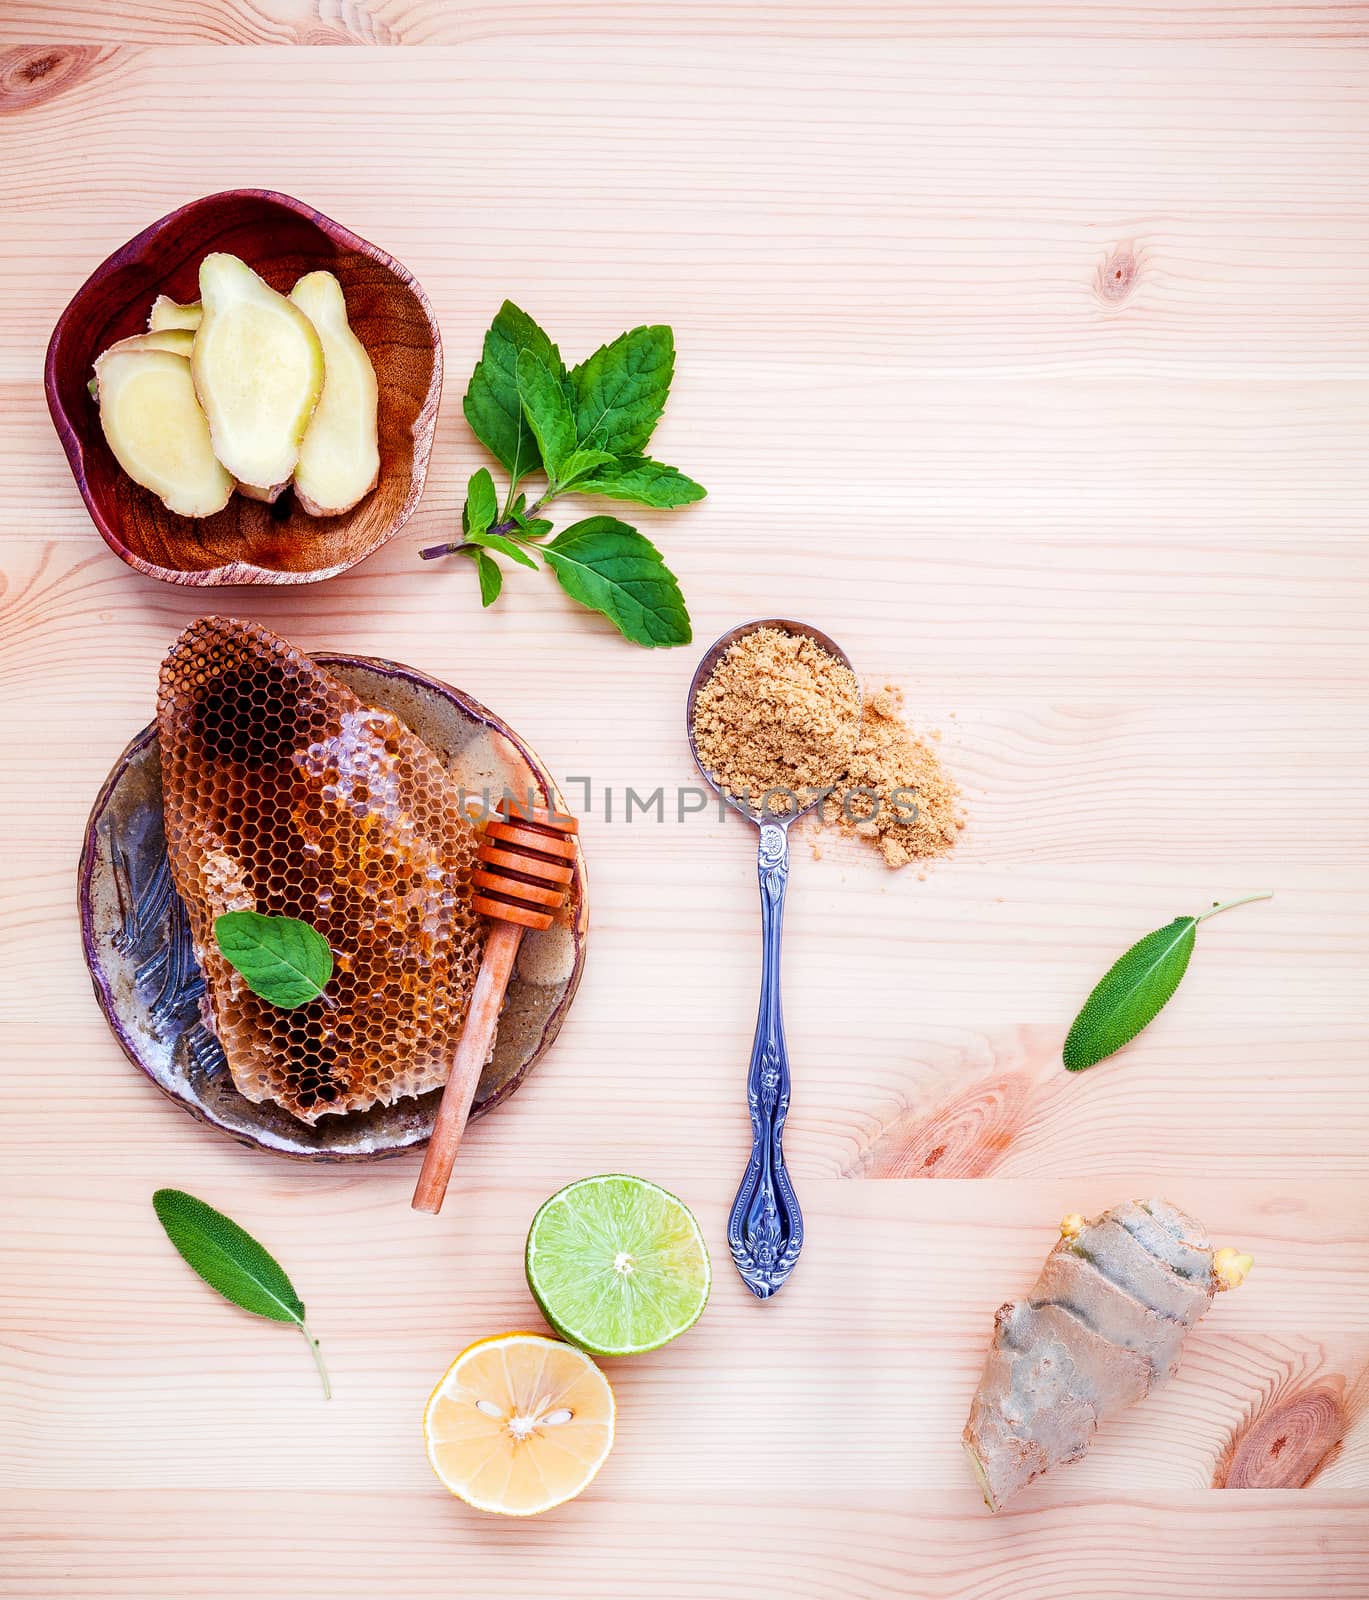 Ingredients for a healthy ginger tea honeycomb in wooden bowl with  pepper mint ginger root and sage leaves set up on white wooden background. Flat lay.